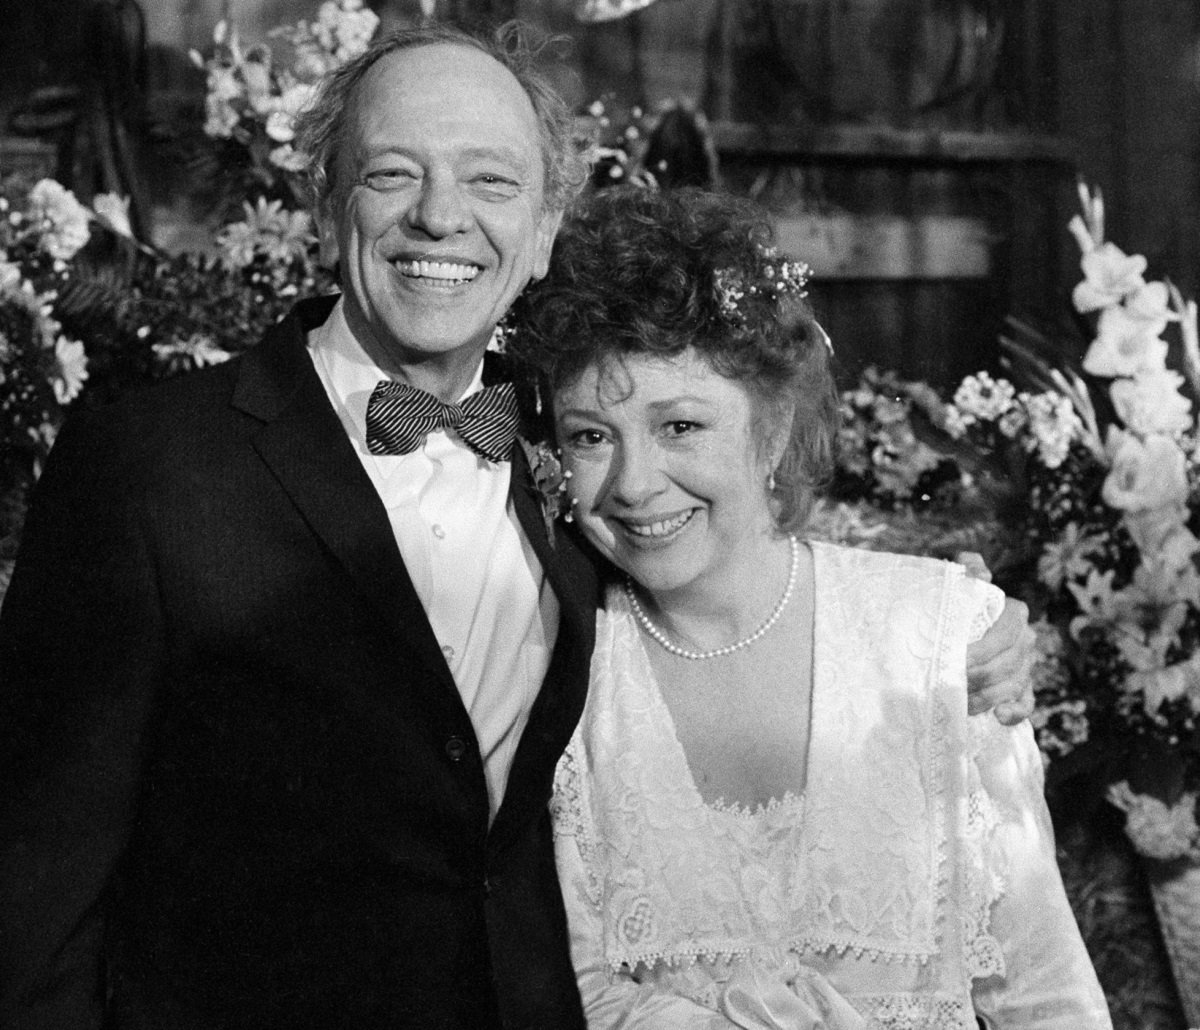 Don Knotts as Barney Fife, Betty Lynn as Thelma Lou in 'Return to Mayberry'